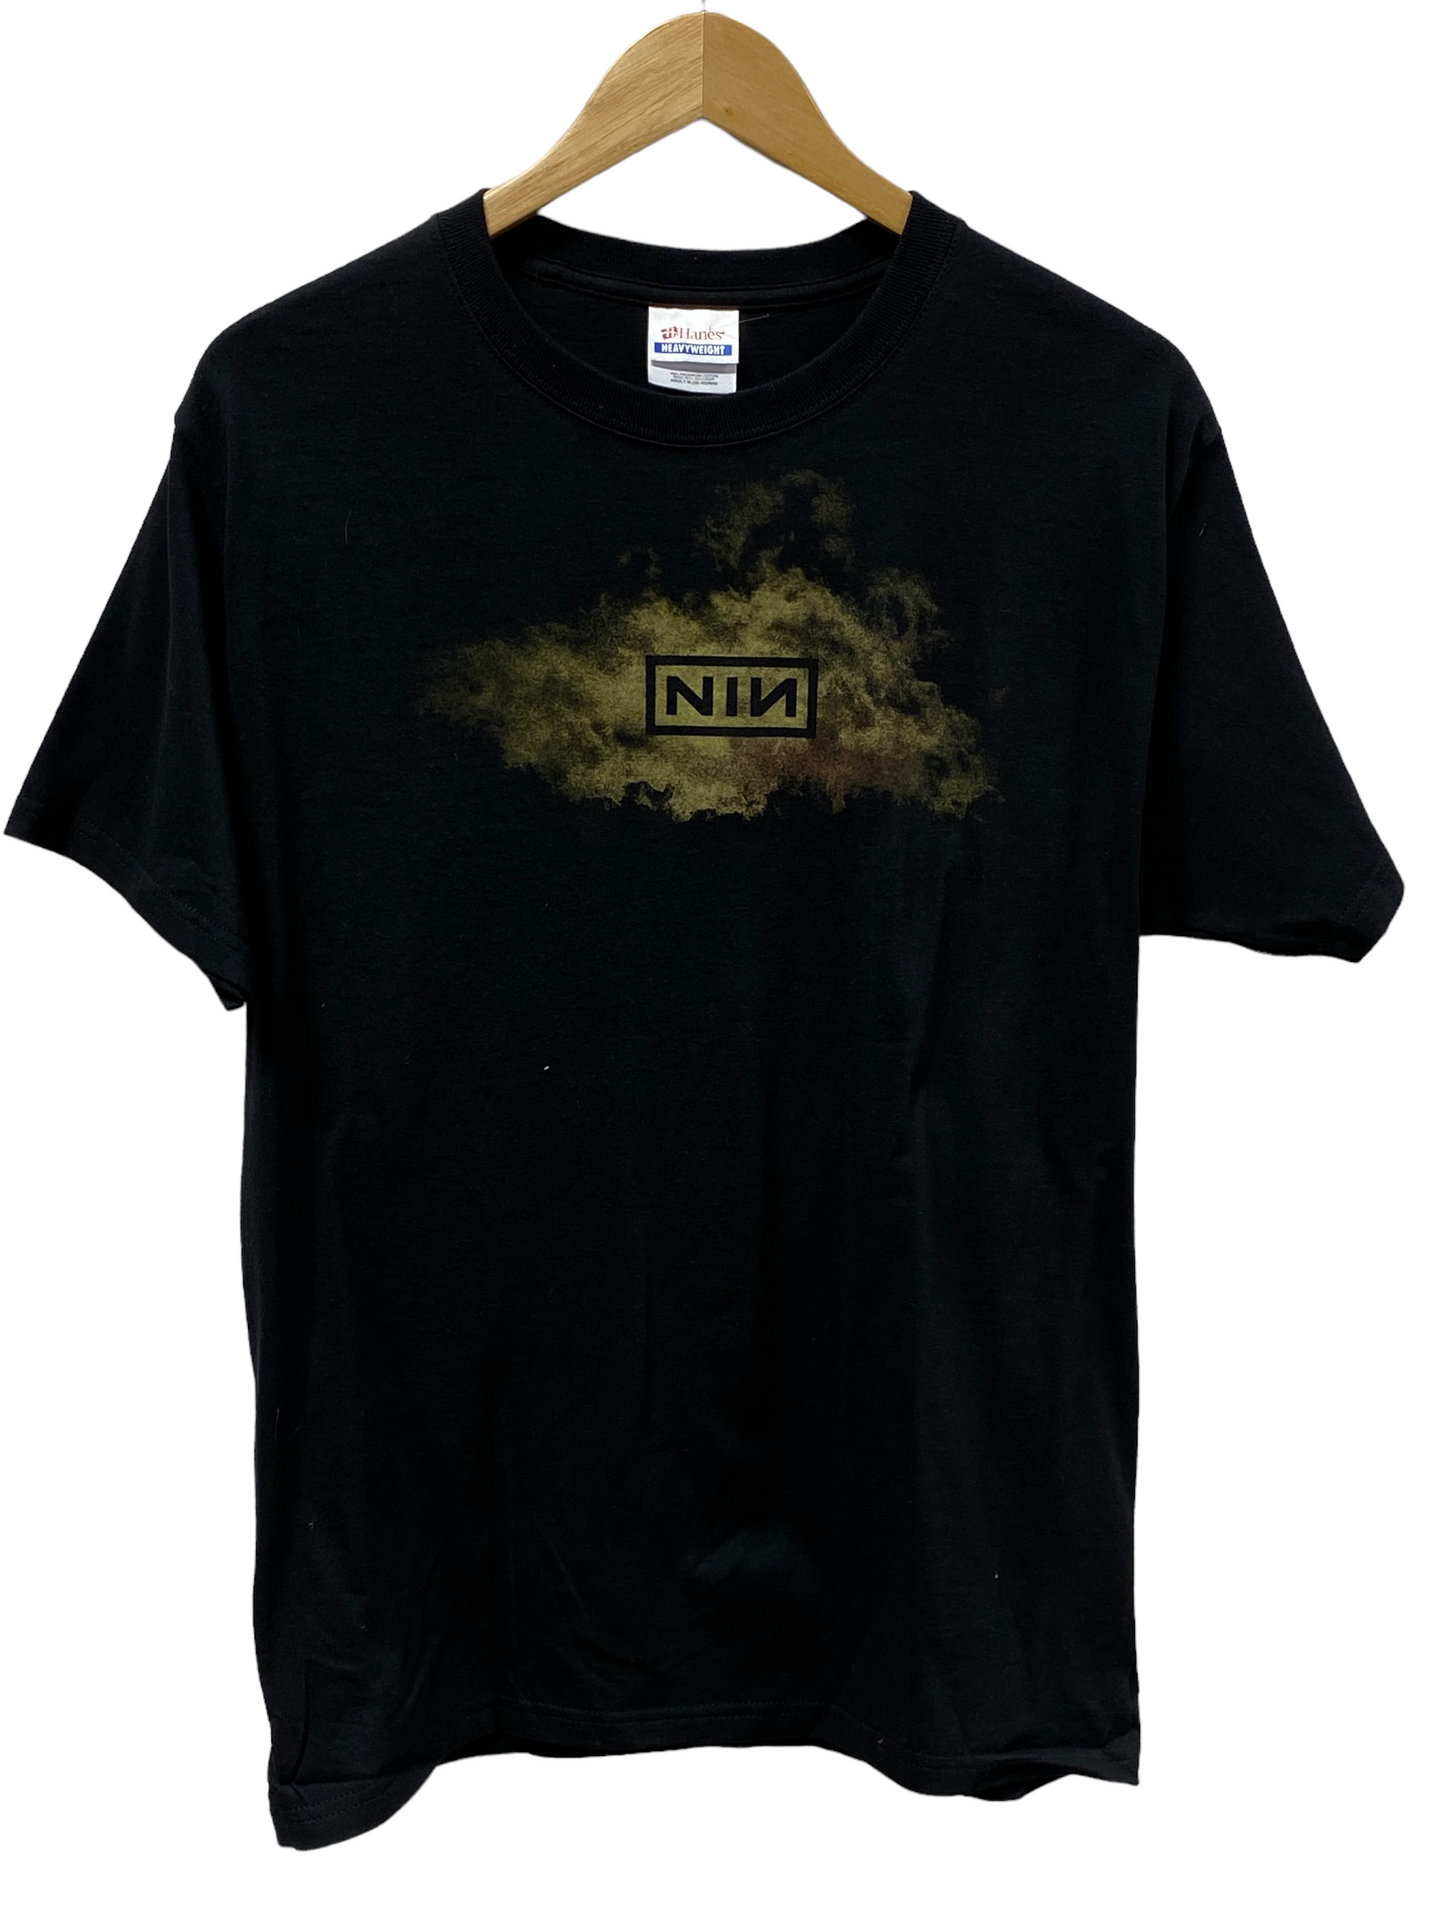 00's Nine Inch Nails Graphic Band Tee Size Medium